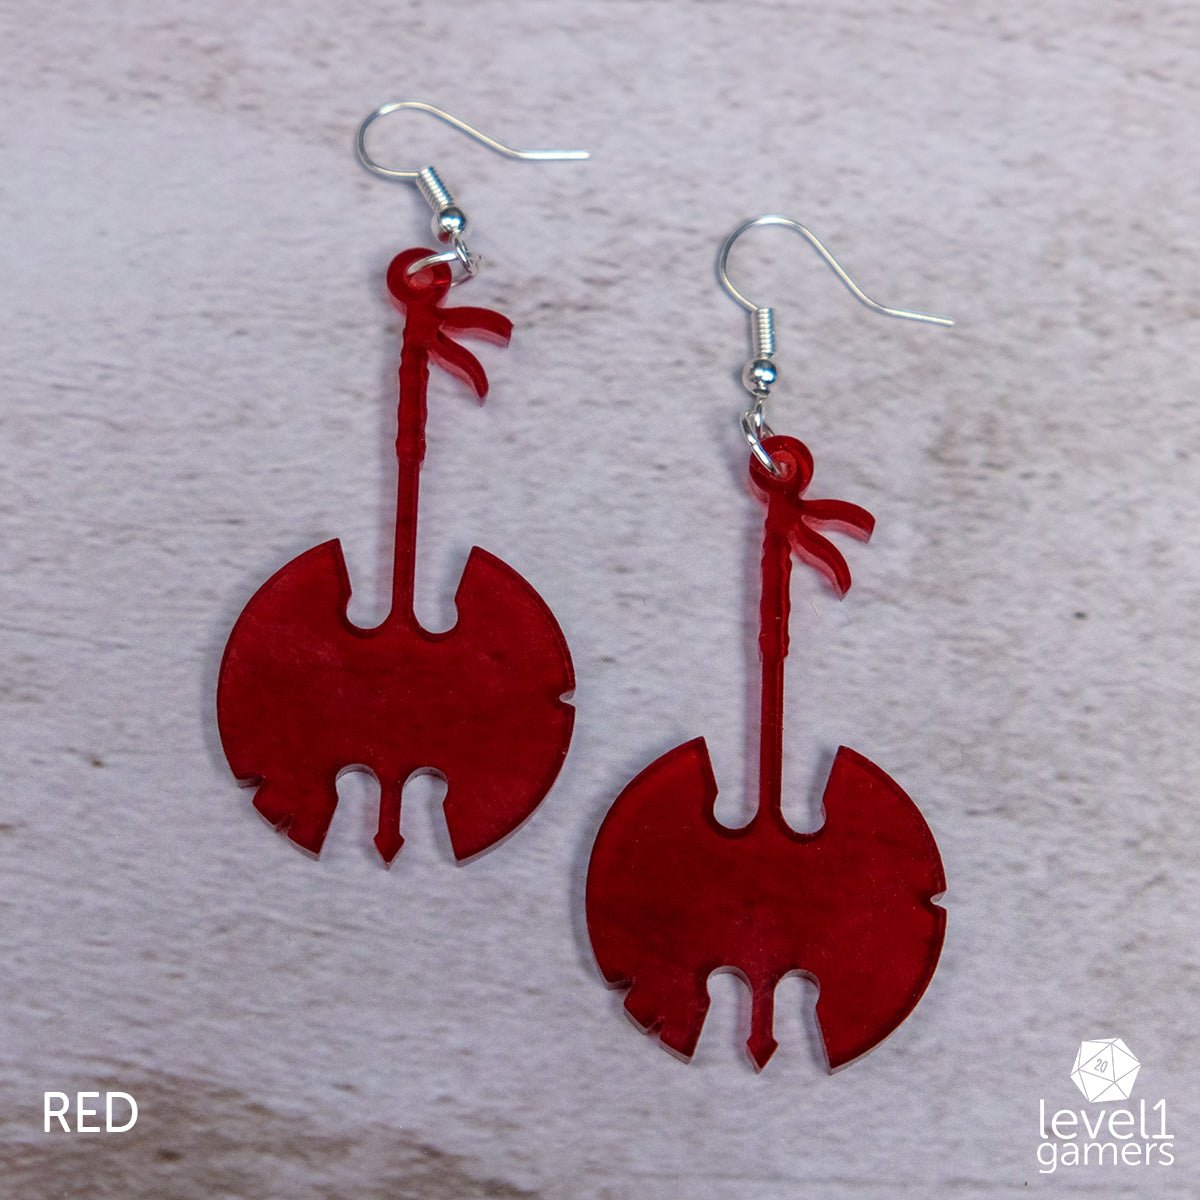 Barbarian Axe Acrylic Earrings  Level 1 Gamers Pendant Red 